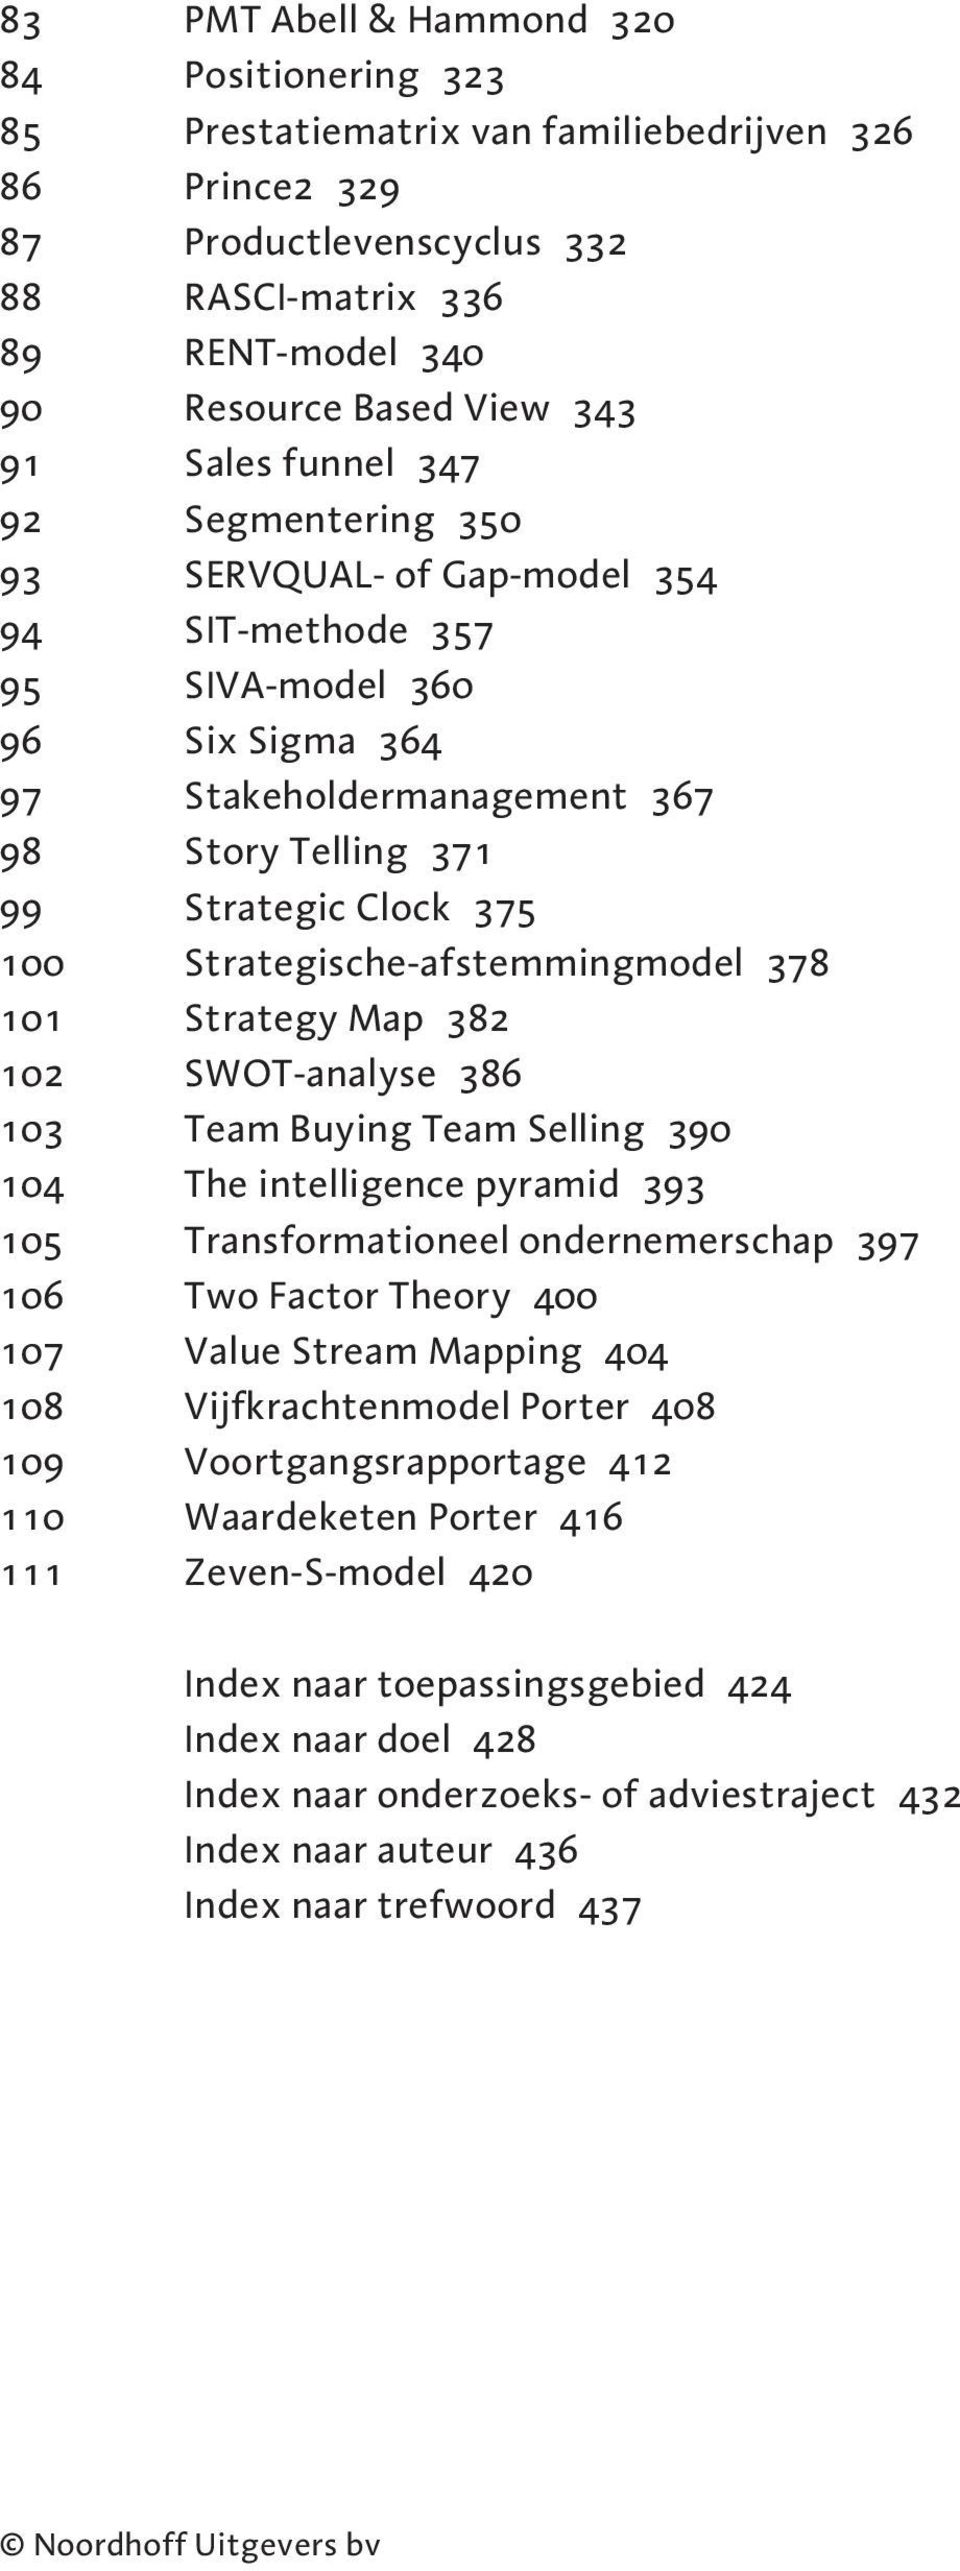 100 Strategische-afstemmingmodel 378 101 Strategy Map 382 102 SWOT-analyse 386 103 Team Buying Team Selling 390 104 The intelligence pyramid 393 105 Transformationeel ondernemerschap 397 106 Two